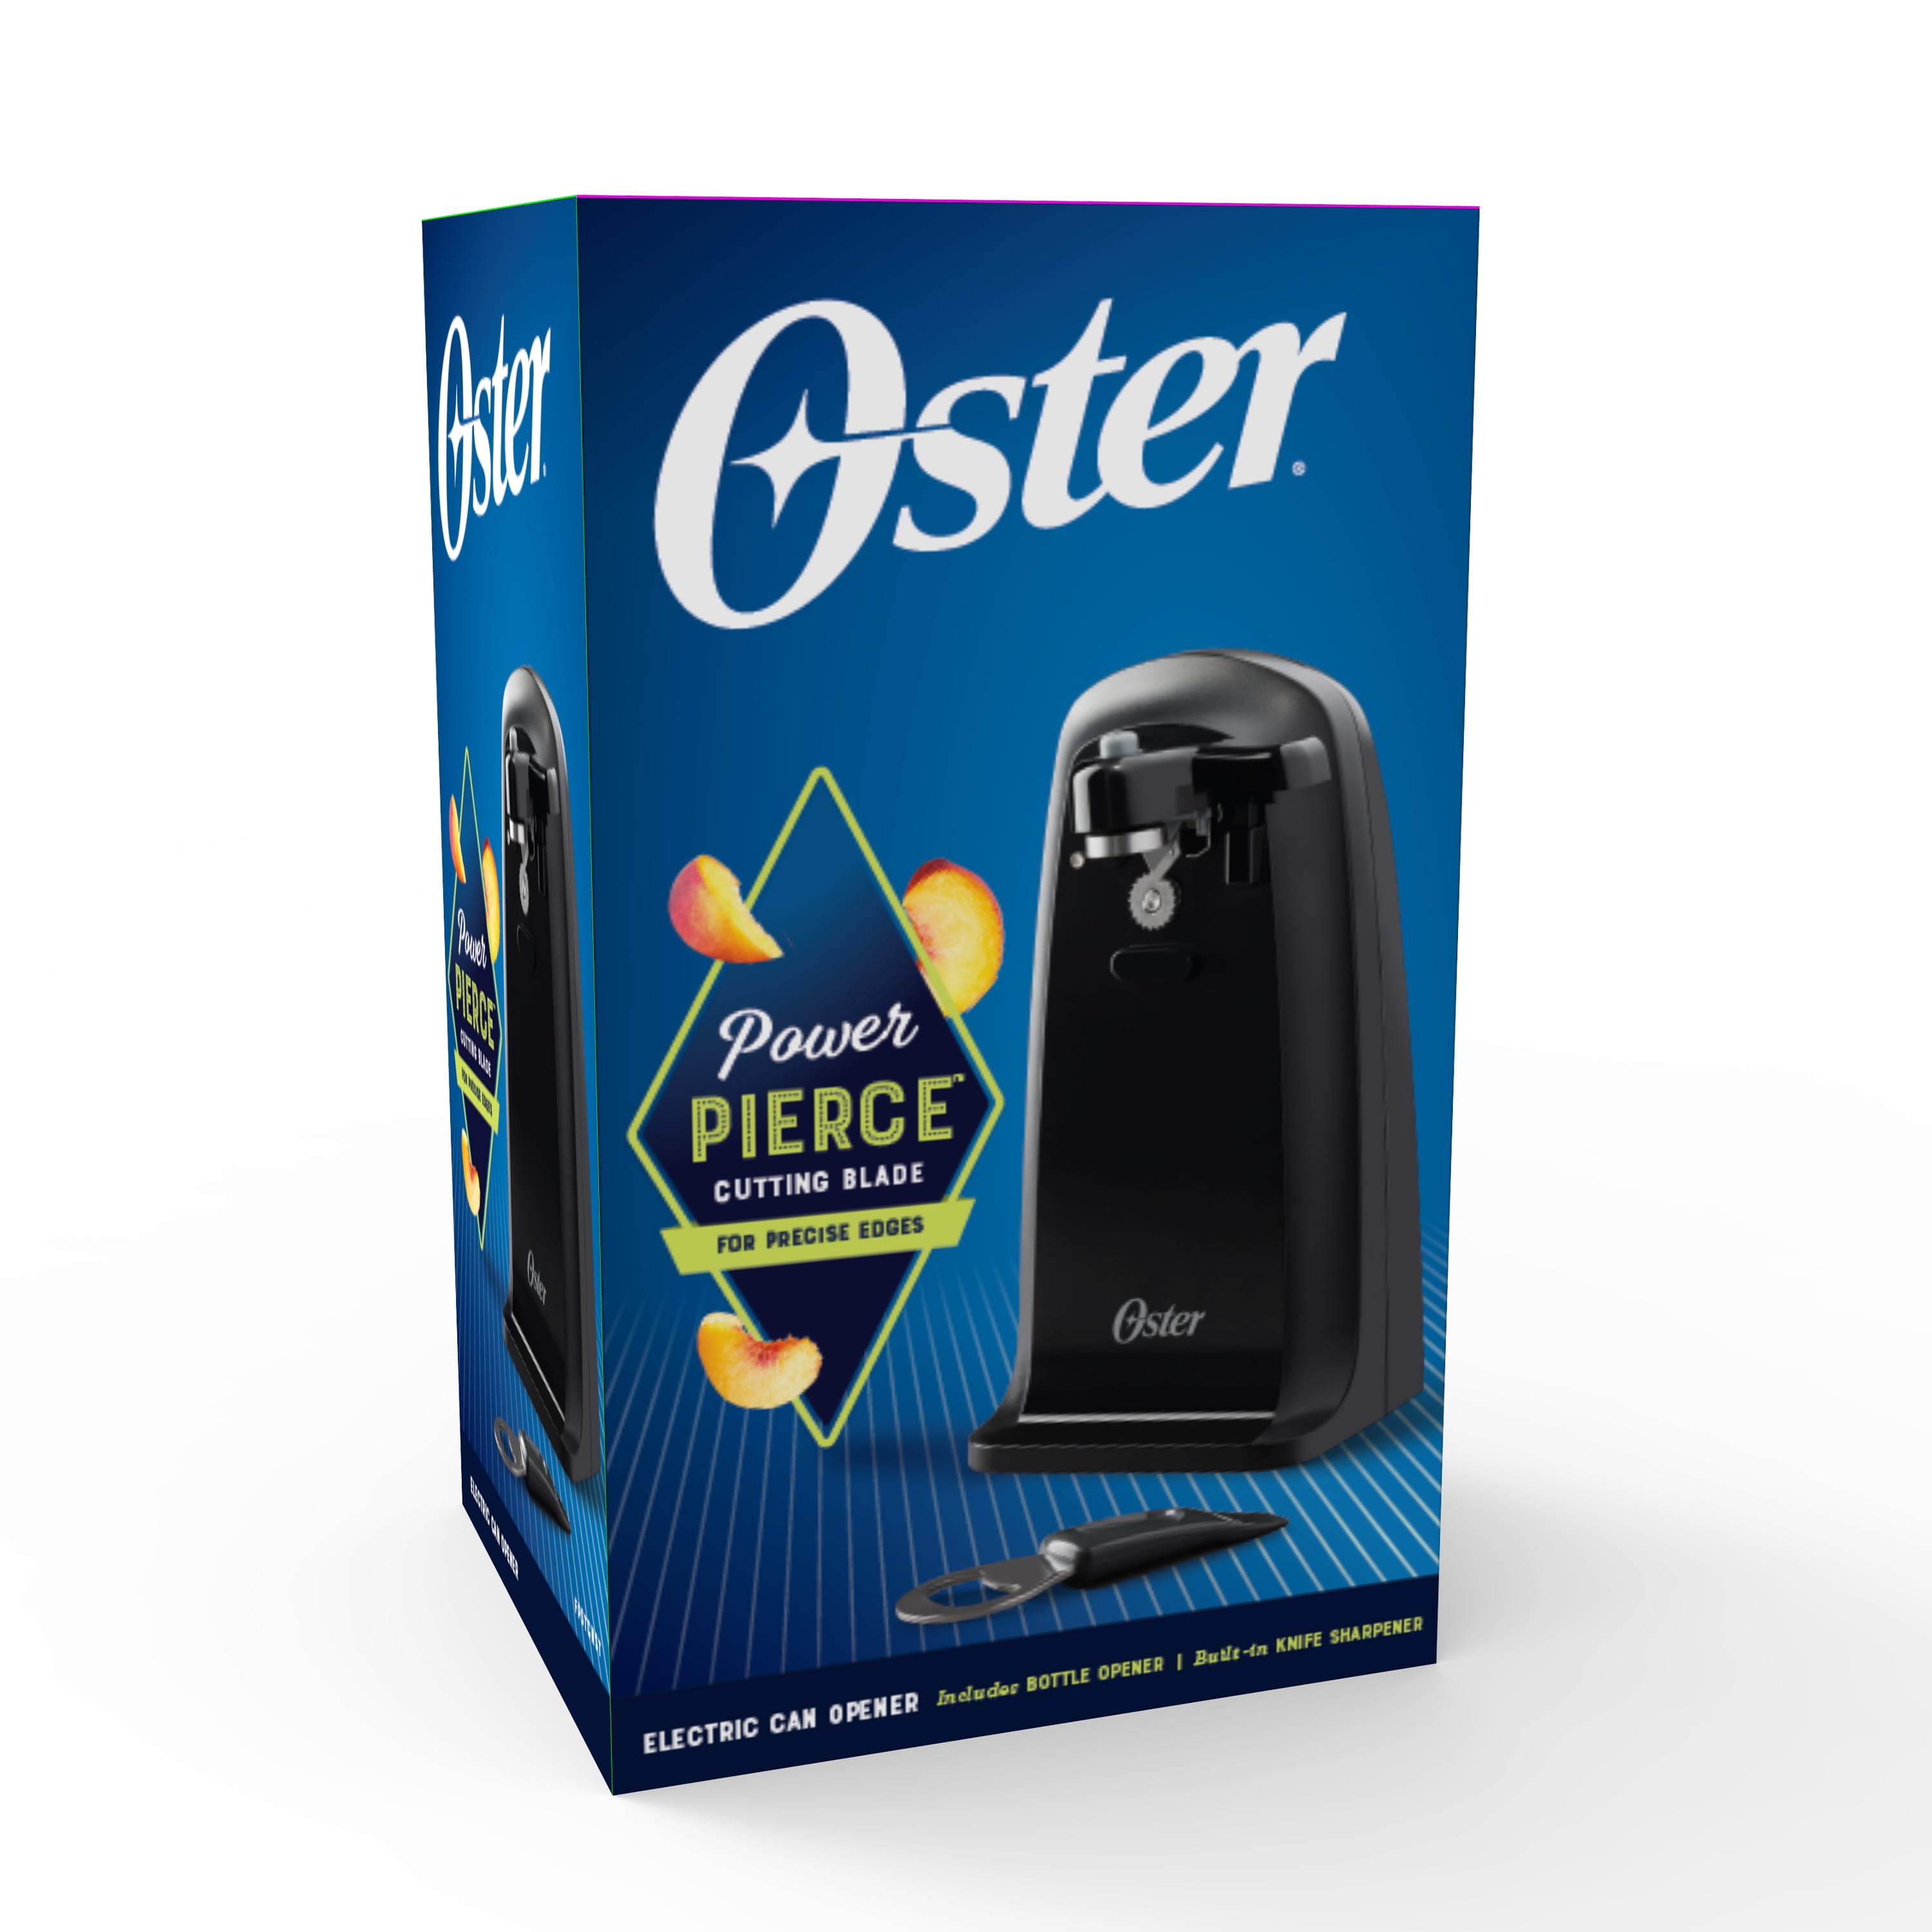 Oster Electric Can Opener with Power Pierce Cutting Blade for Precise  Edges, Black